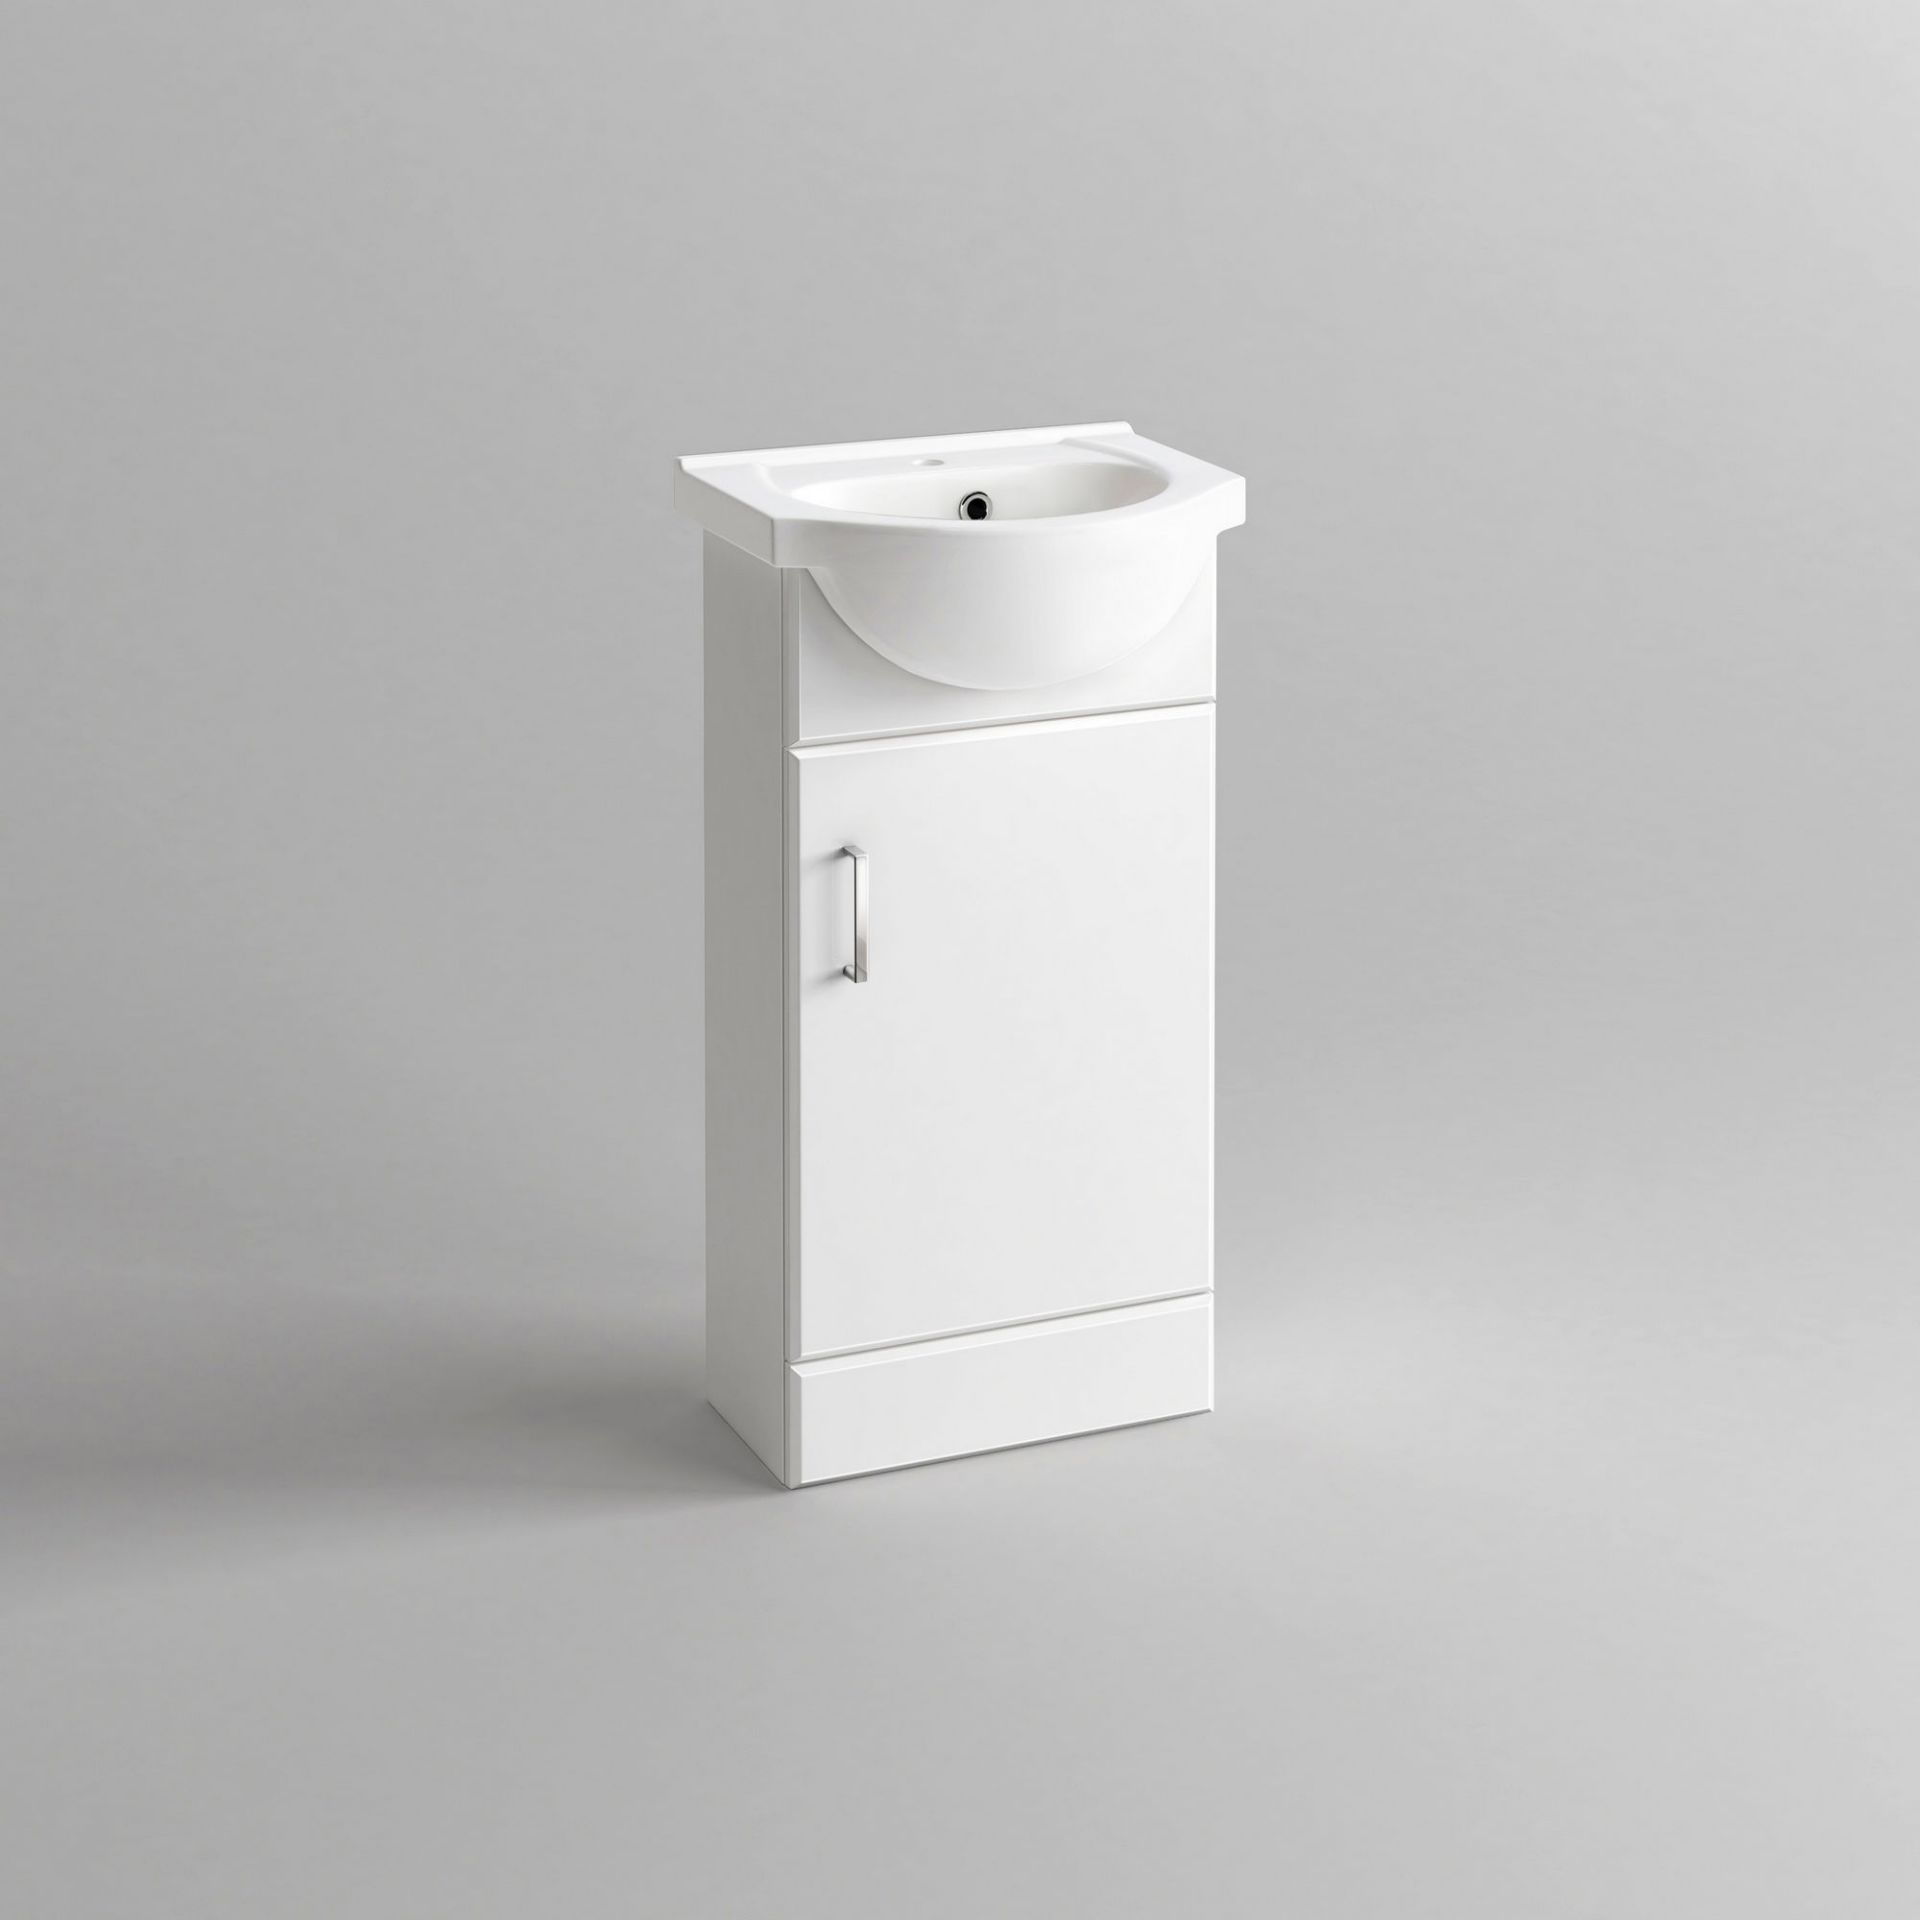 (KL19) 410mm Quartz Gloss White Built In Basin Cabinet. Comes complete with basin. Pristine gloss - Image 3 of 4